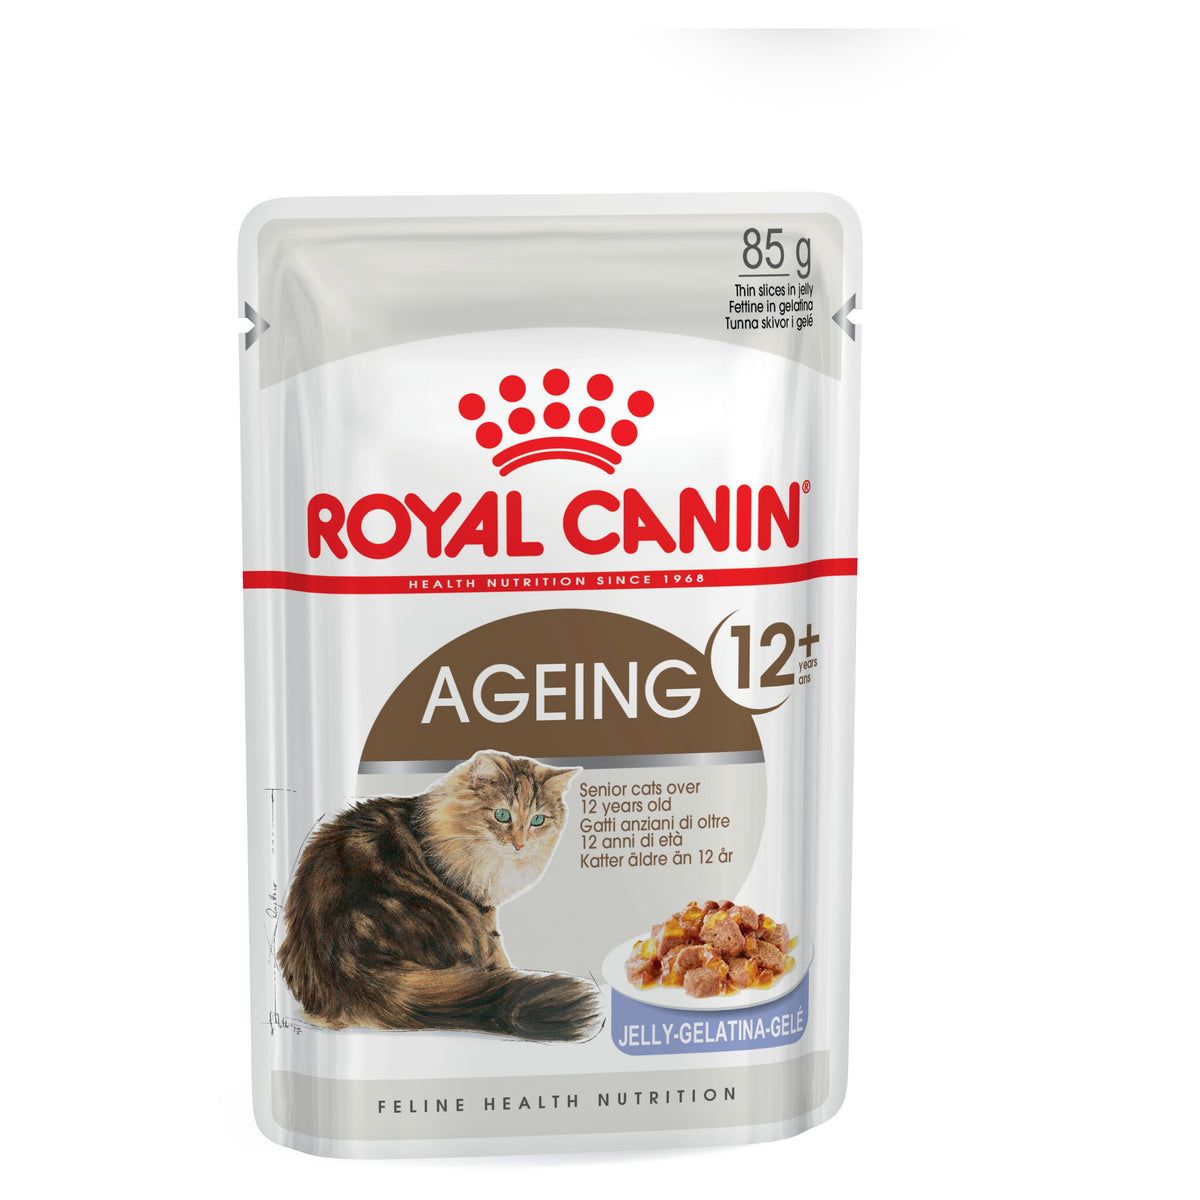 Royal Canin Ageing 12 plus Jelly Pouch